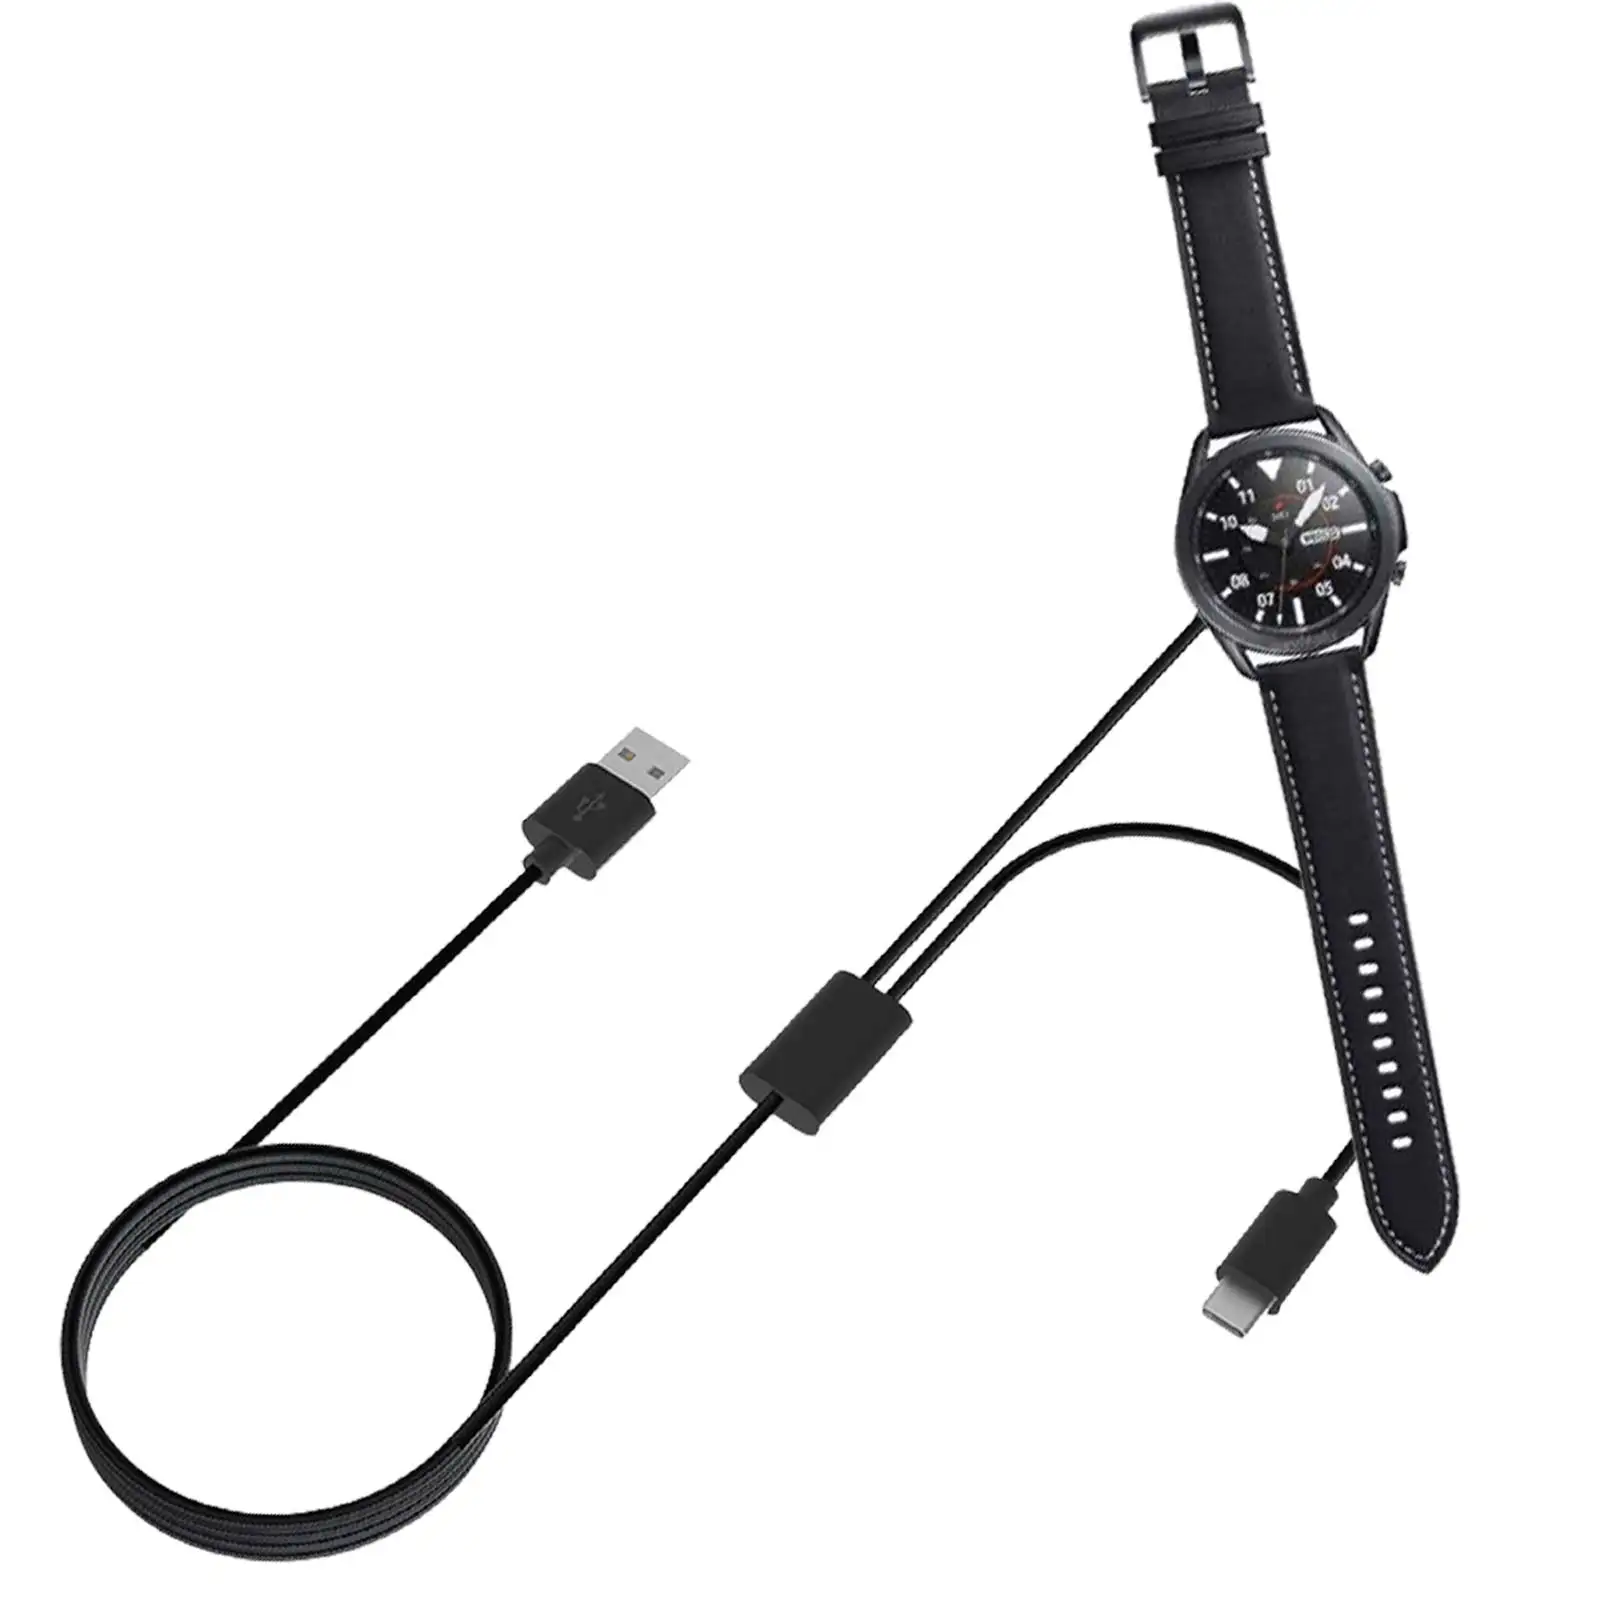 

Charging Cable For Galaxy Watch 3/4/Active 2/Active &forGalaxy Buds Plus/Live/Pro ForGalaxy S22/21/20/10 Magnet Wireless Charger